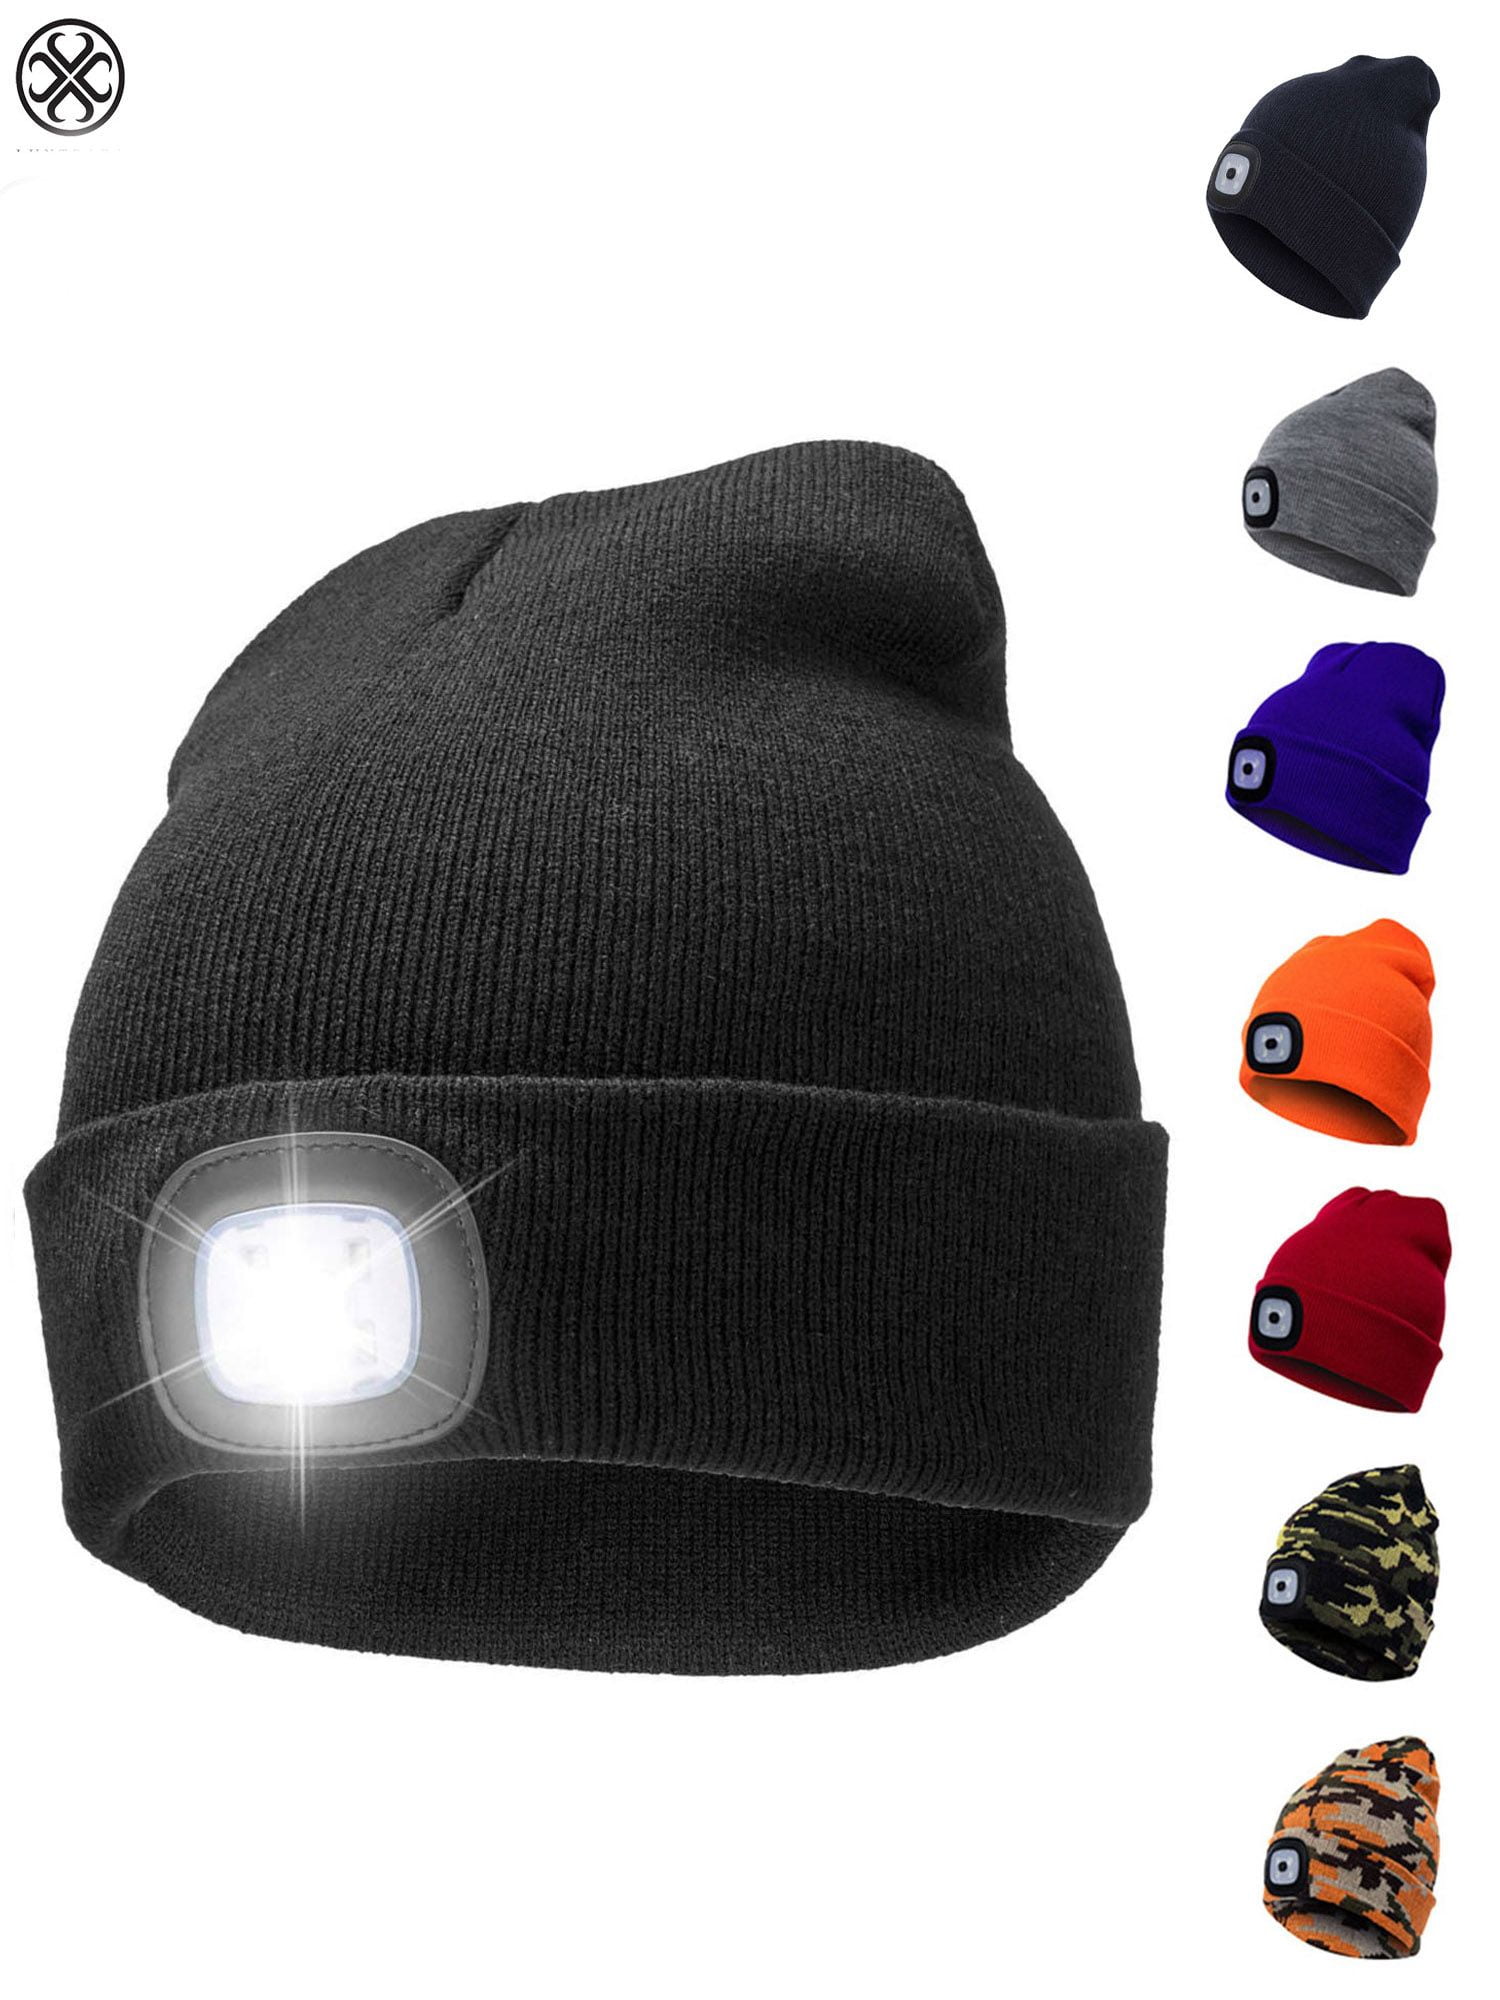 Camping at Night Biking Winter Warm Knitted Flashlight Hat Outdoor Sports LED Hat Light Headlamp Flashlight for Hiking Presents for Boys Girls LED Lighted Beanie Hat for Kids Fishing Camping